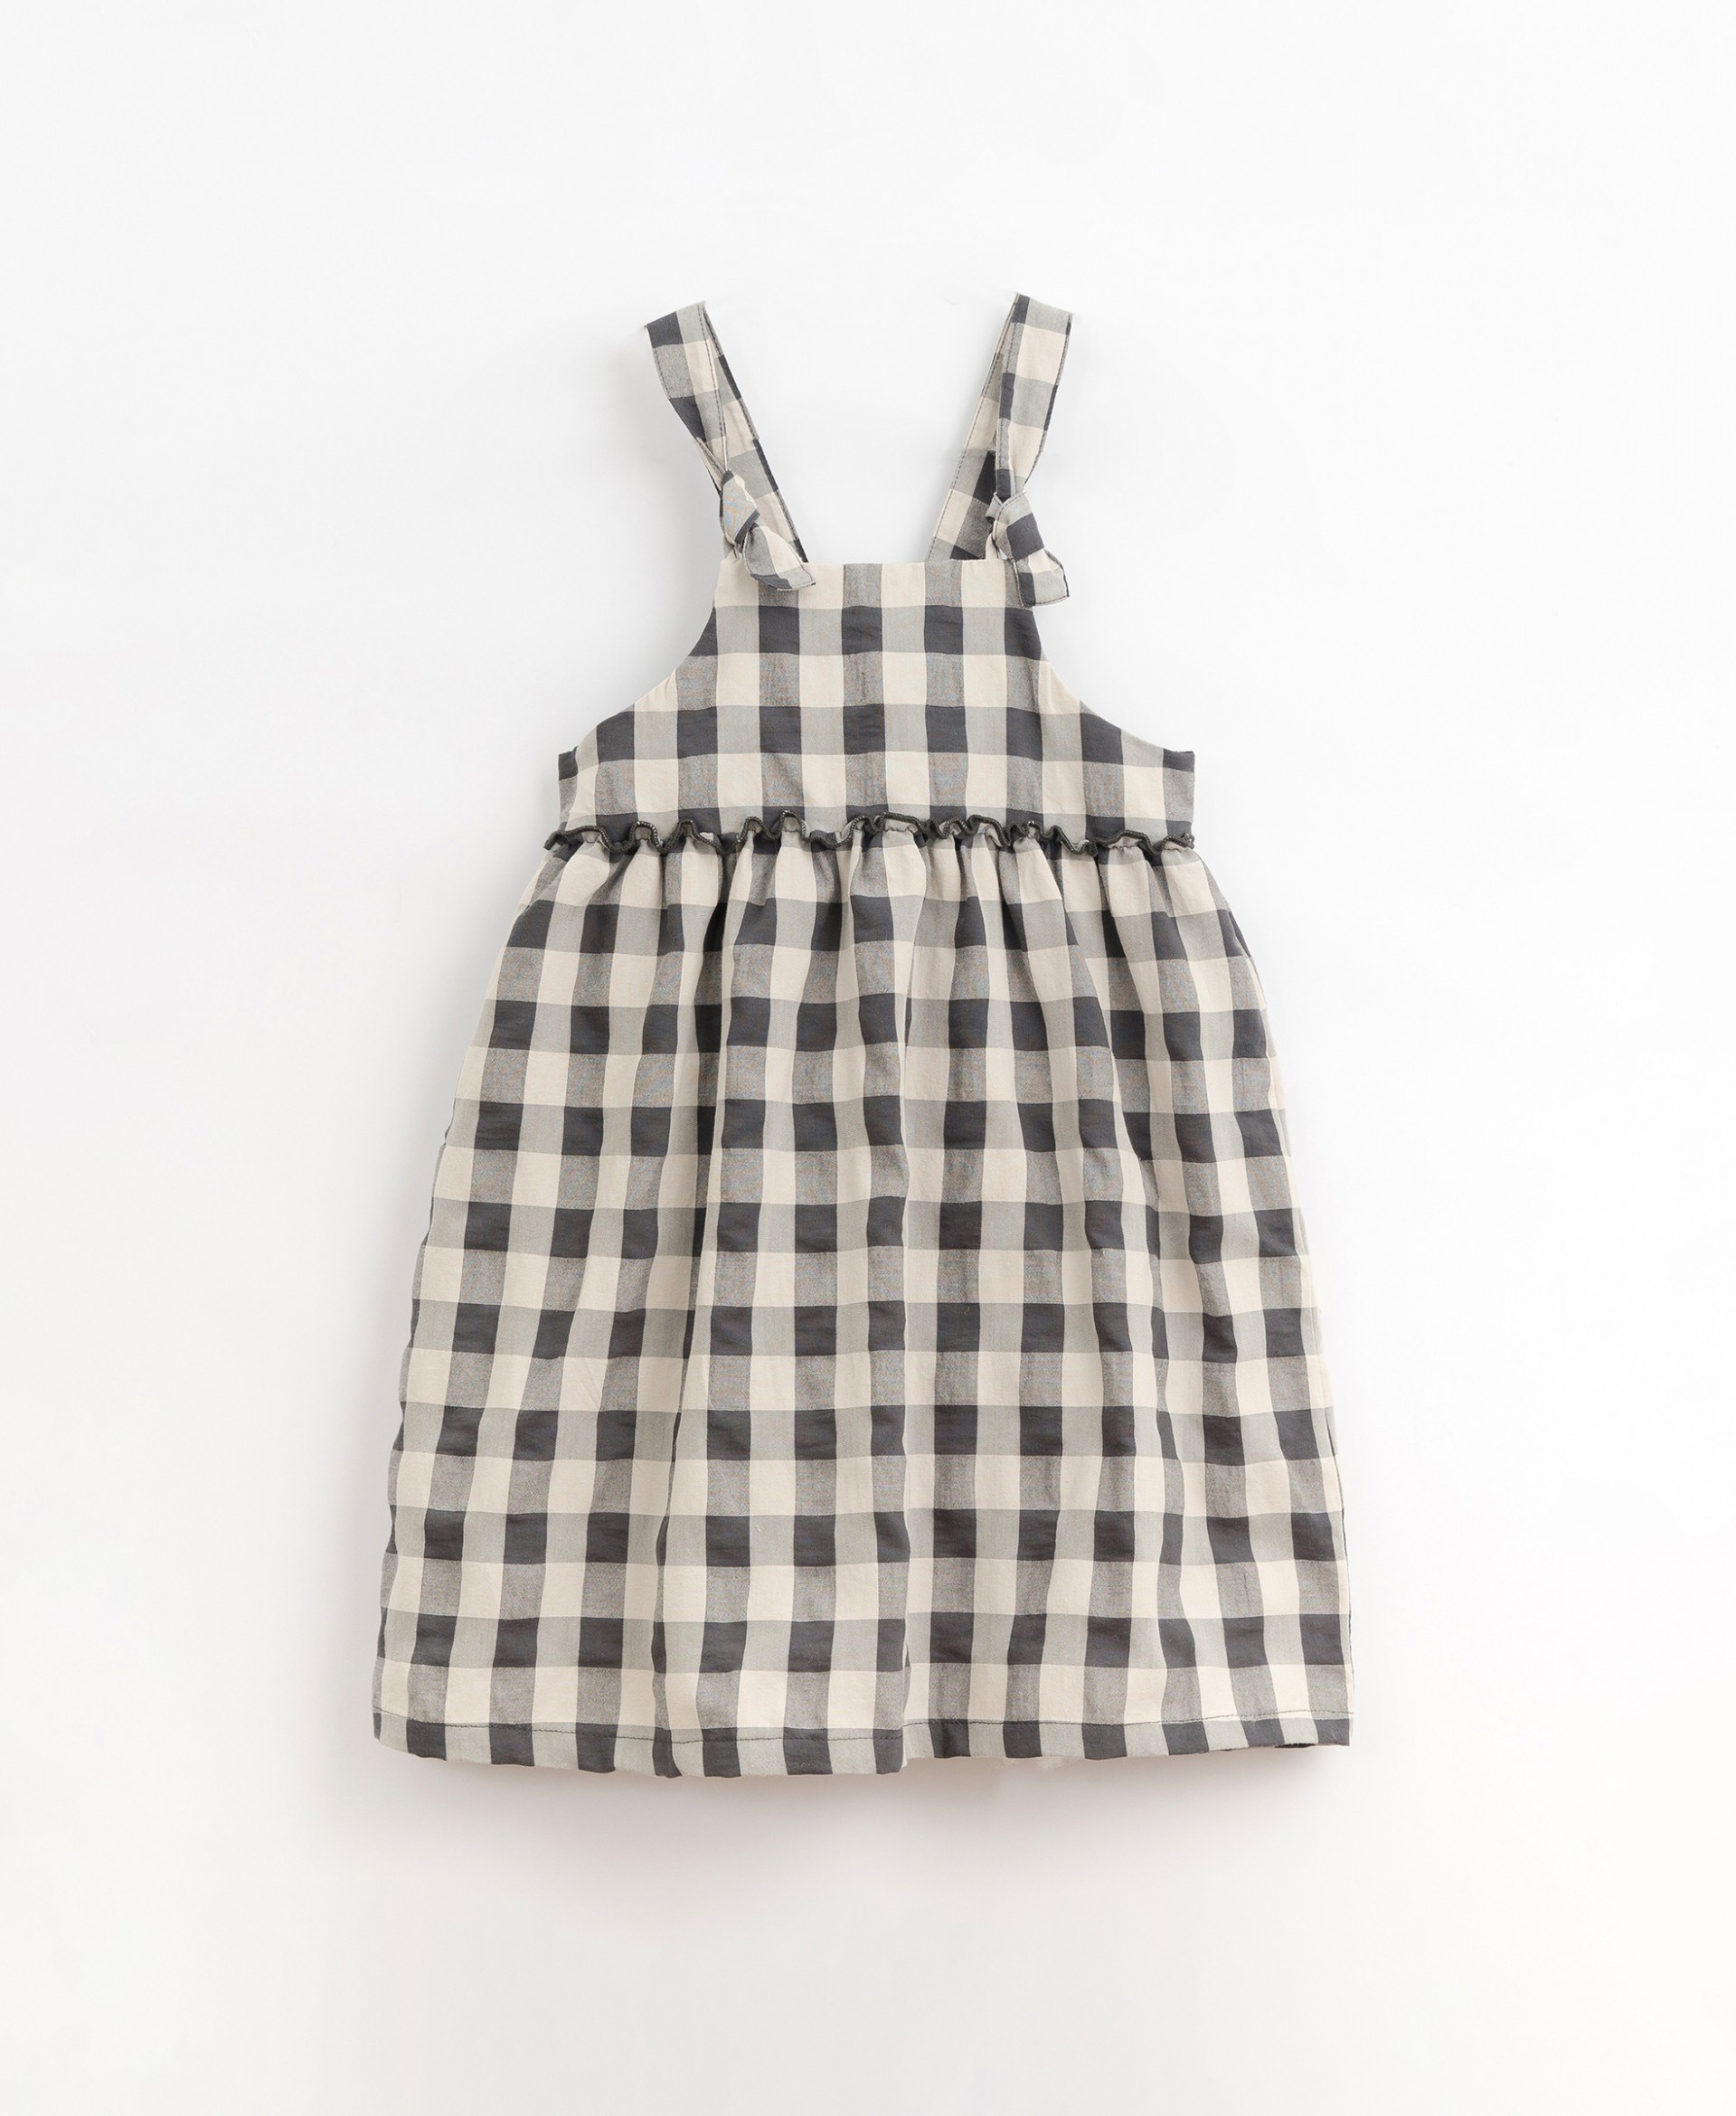 Dress with adjustable straps | Organic Care